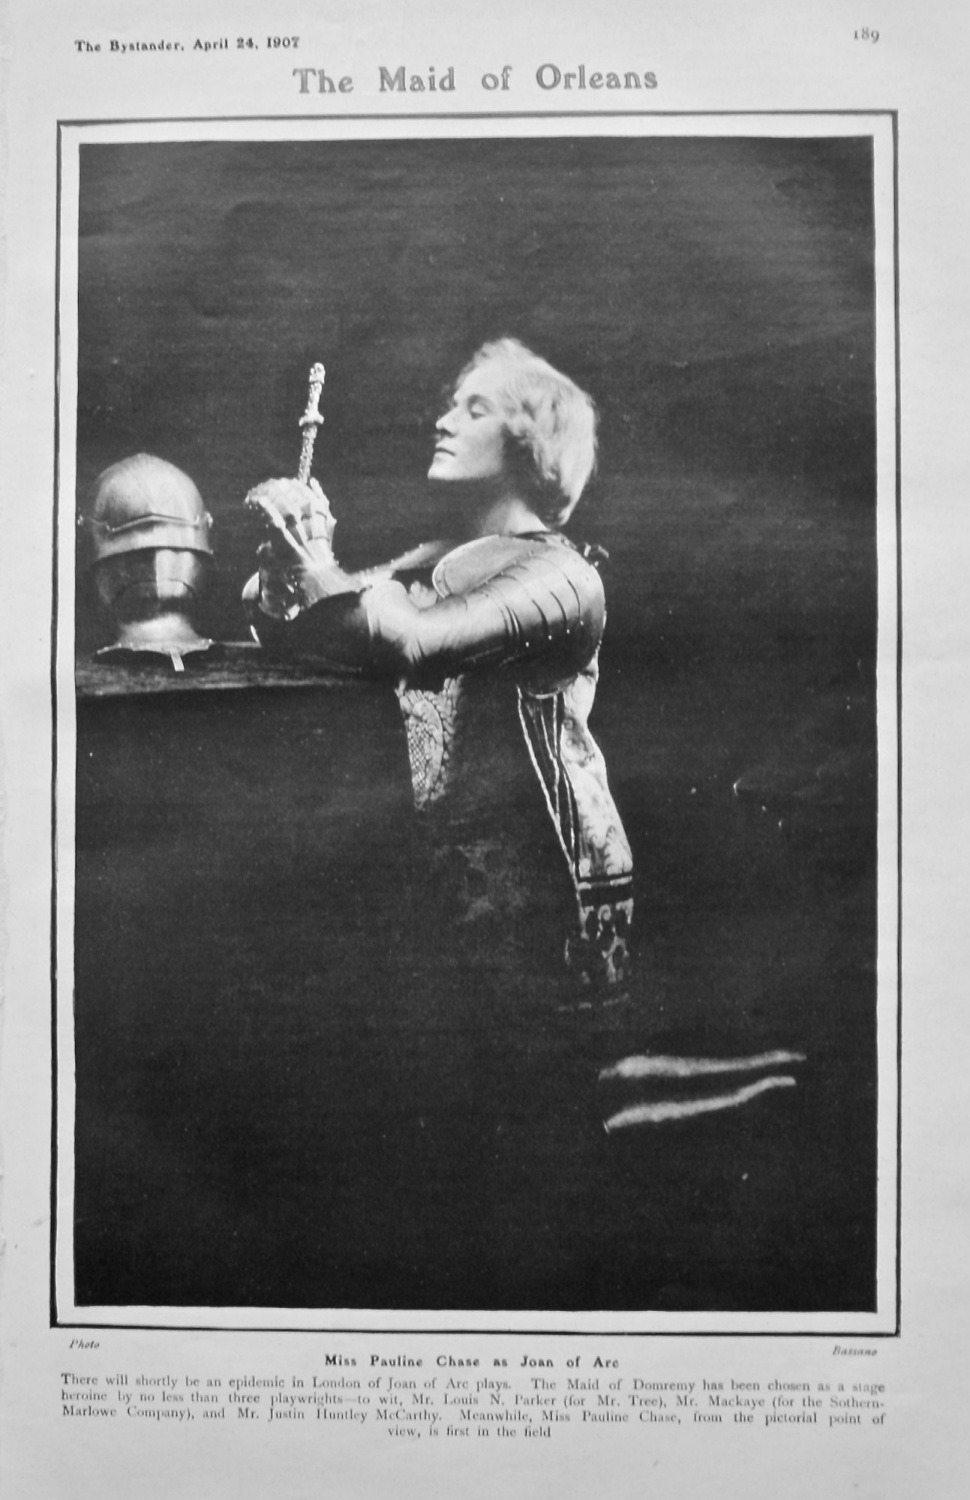 The Maid of Orleans : Miss Pauline Chase as Joan of Arc. 1907.